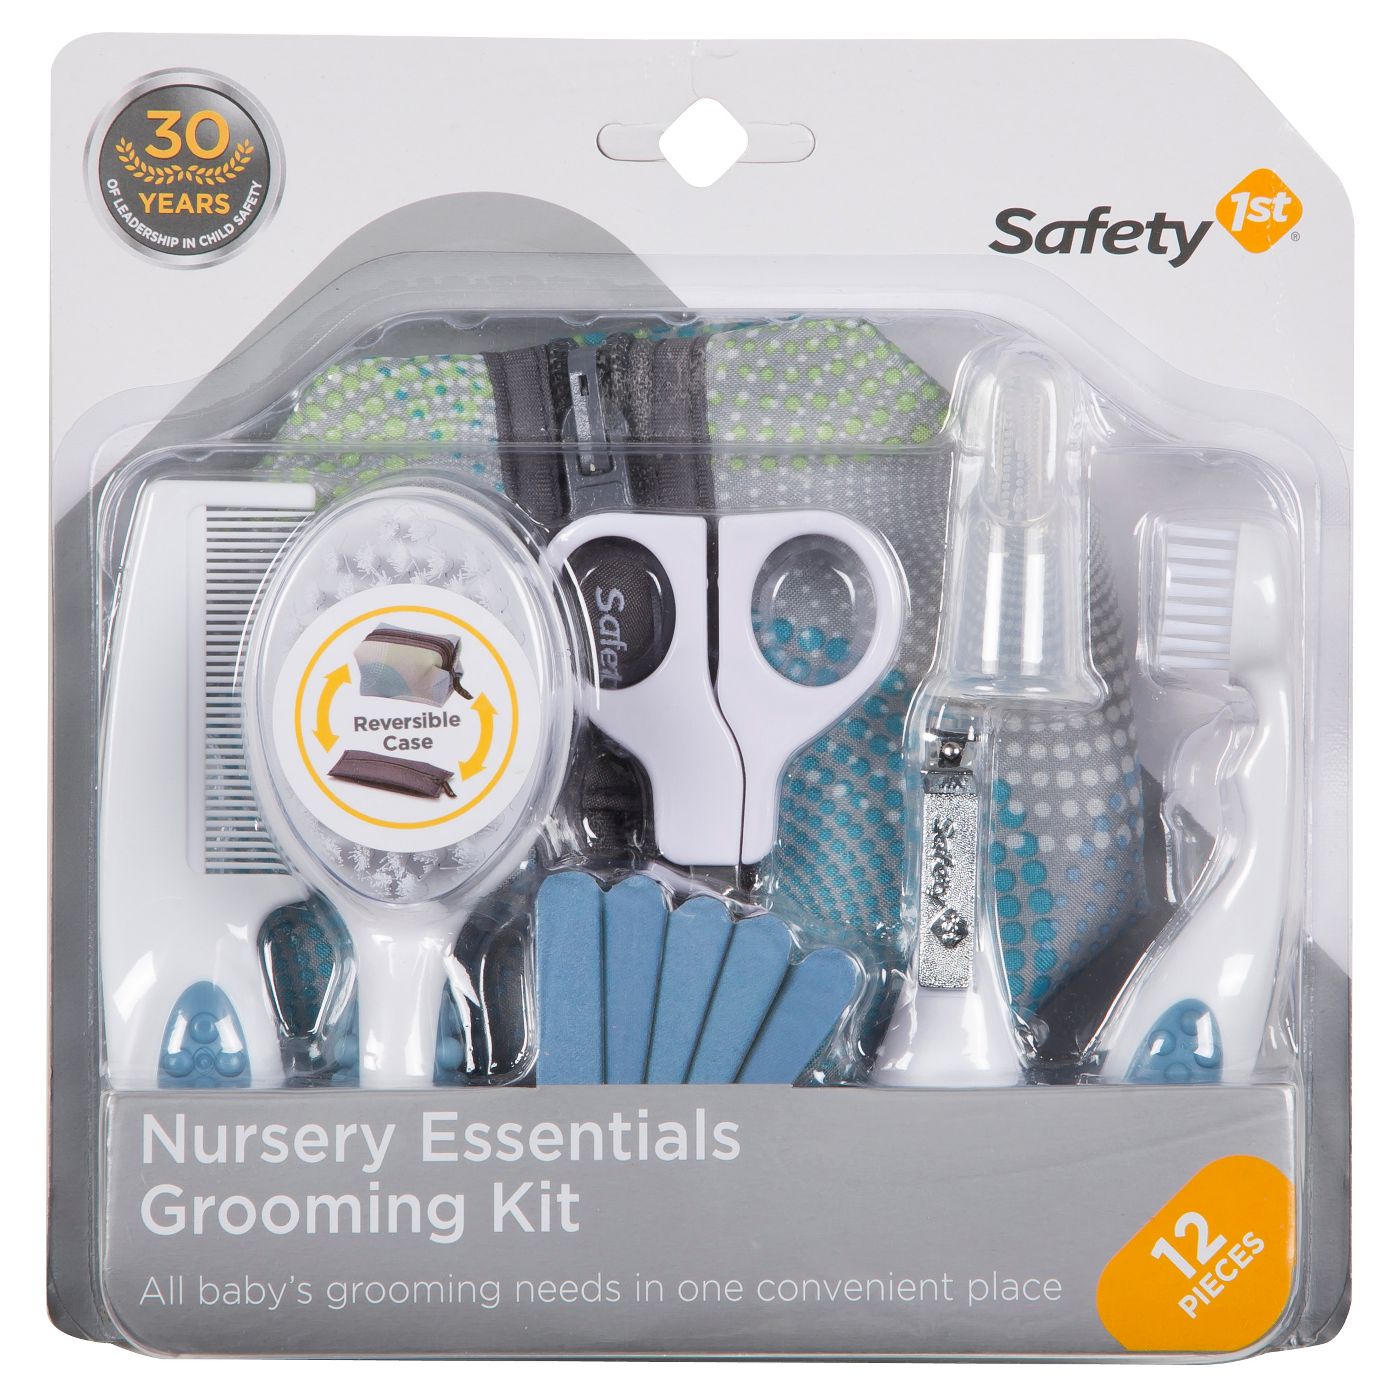 SAFETY 1ST NURSERY ESSENTIALS GROOMING KIT, 12 PIECES